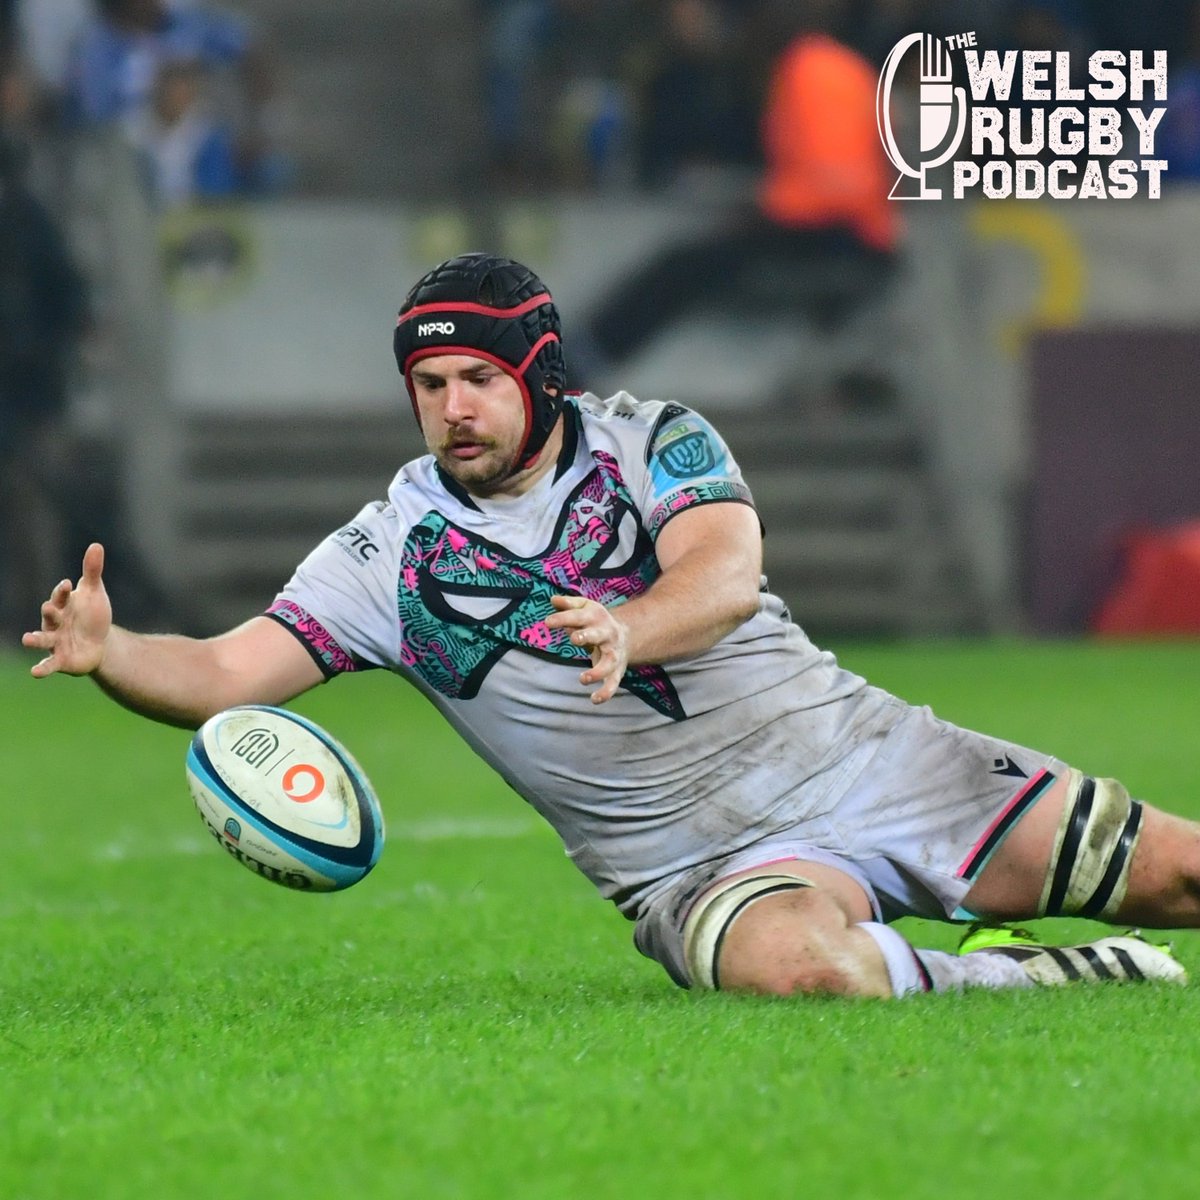 🎙️ NEW POD 🎙️ Another standout performance for Morgan Morris, the potential return of Cory Hill and more talk about going down to three regions - all on the latest Welsh Rugby Podcast. Listen here 👉 tinyurl.com/yvjsesup